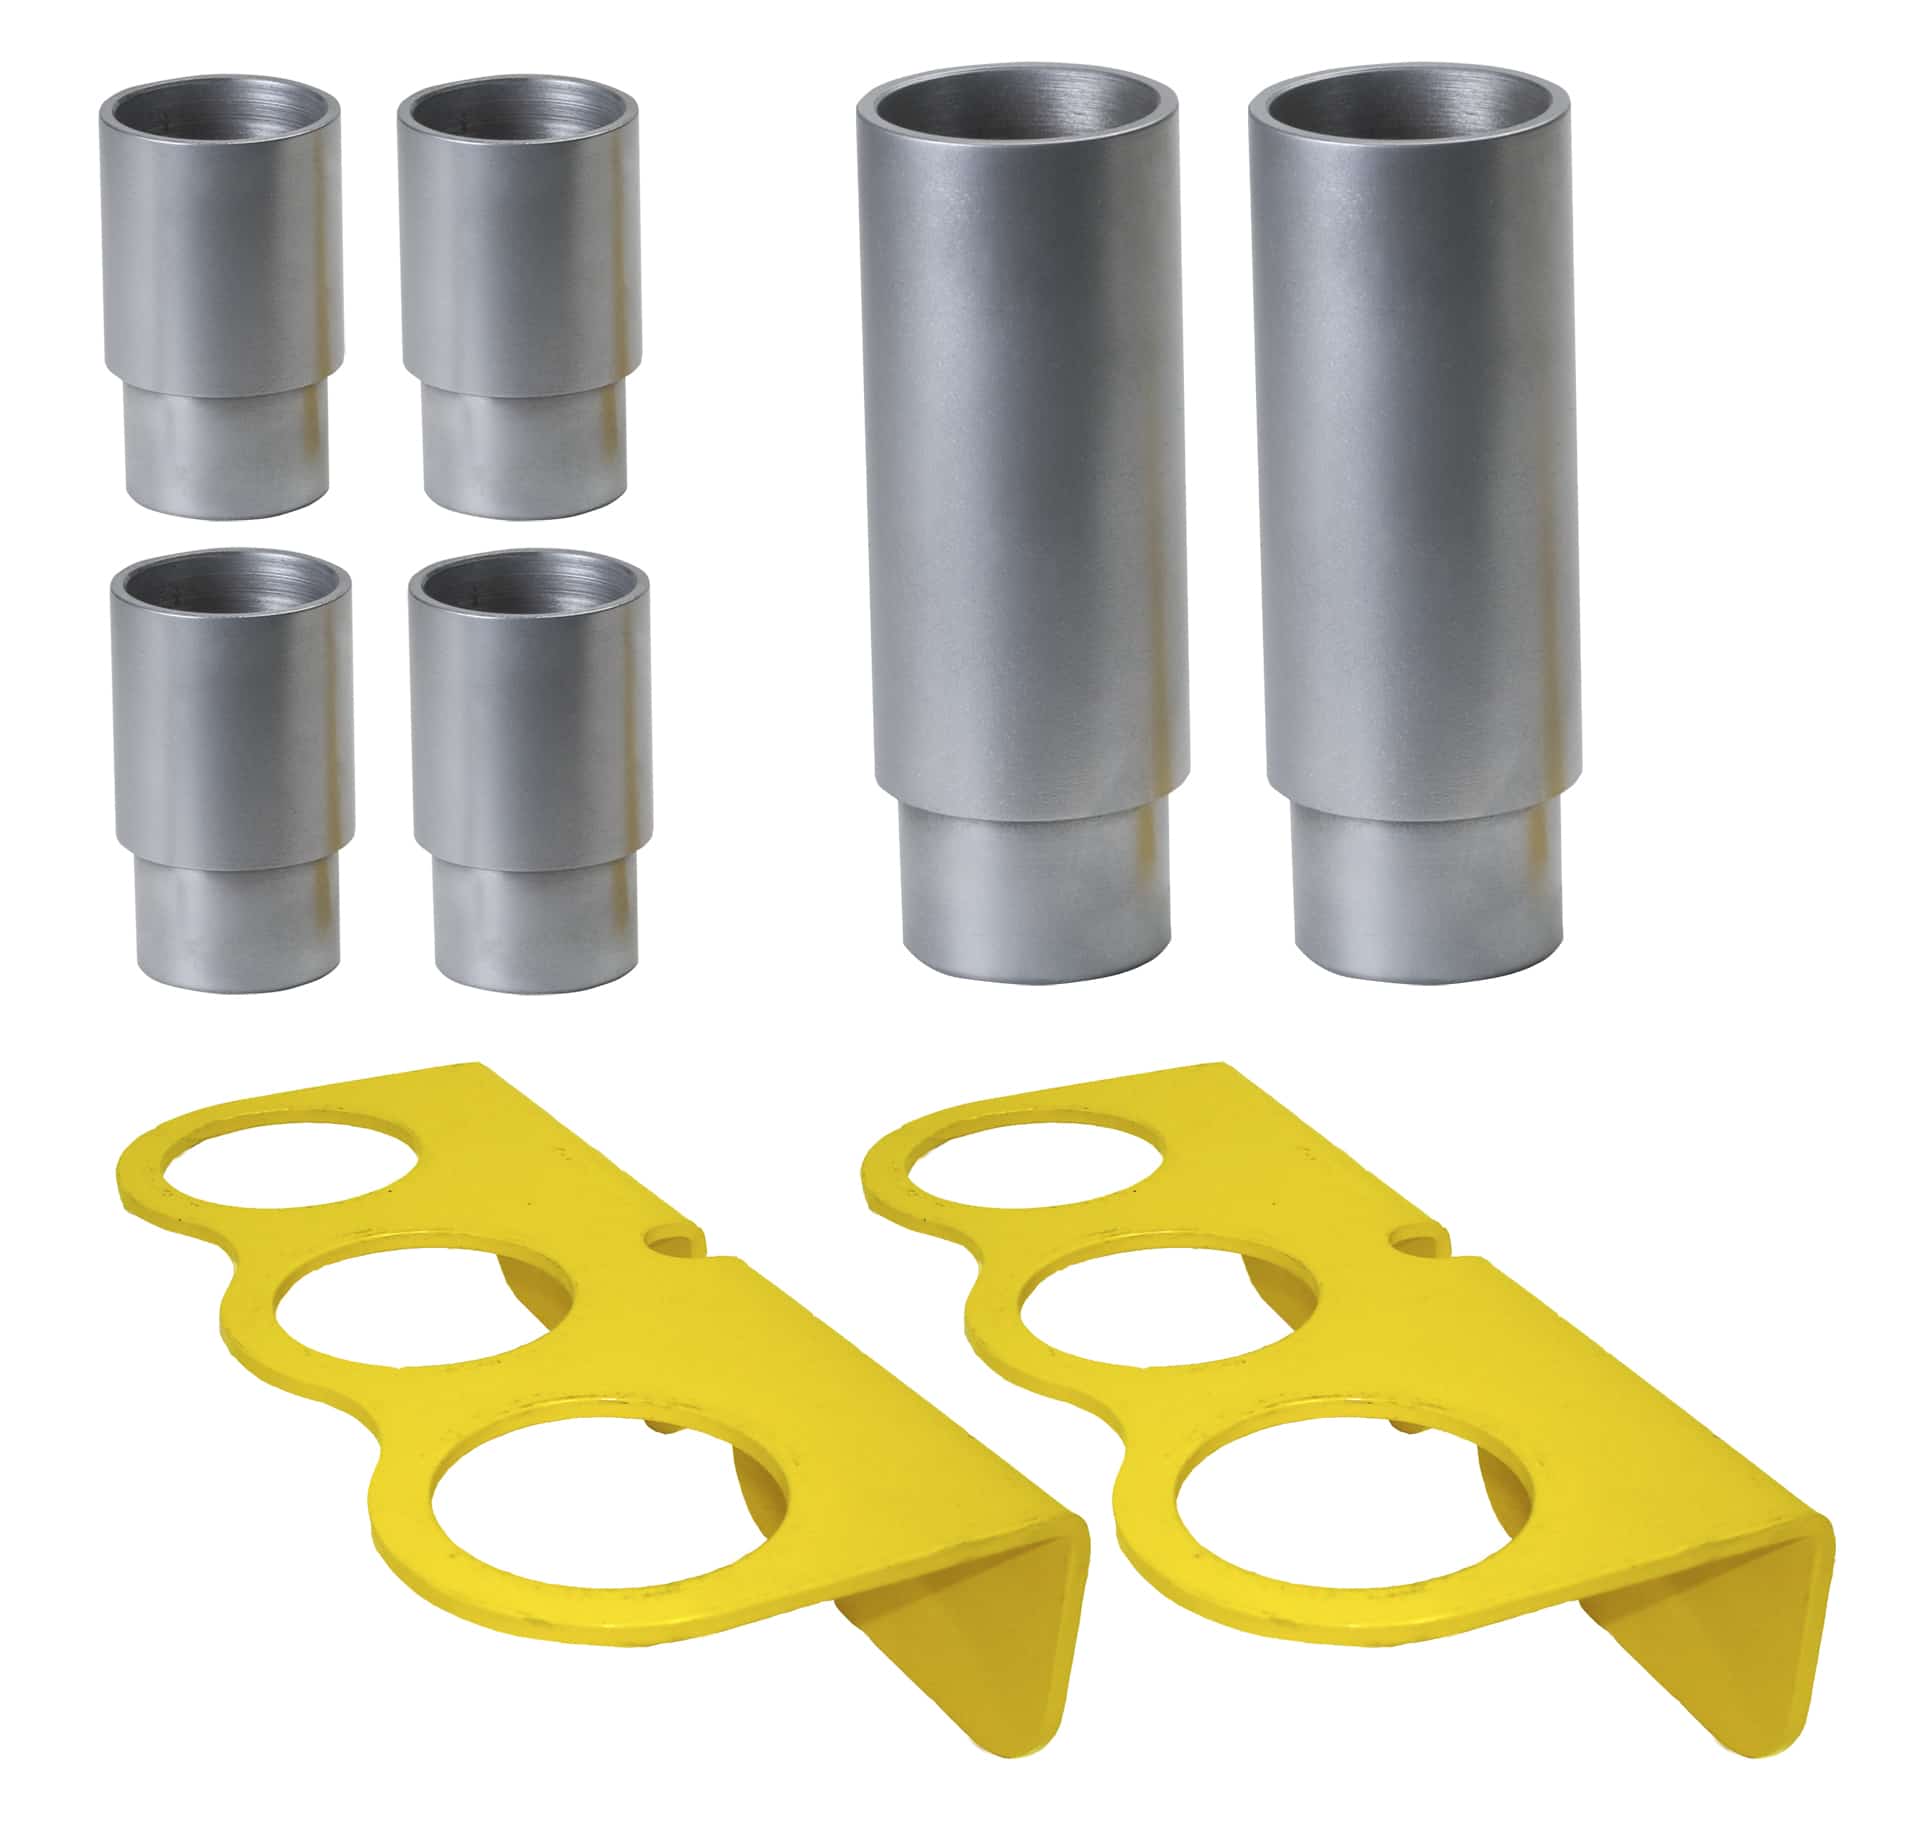 Challenger Lifts - STACK ADAPTER KIT FOR 10K AND 12K 2-POST LIFTS -  10315